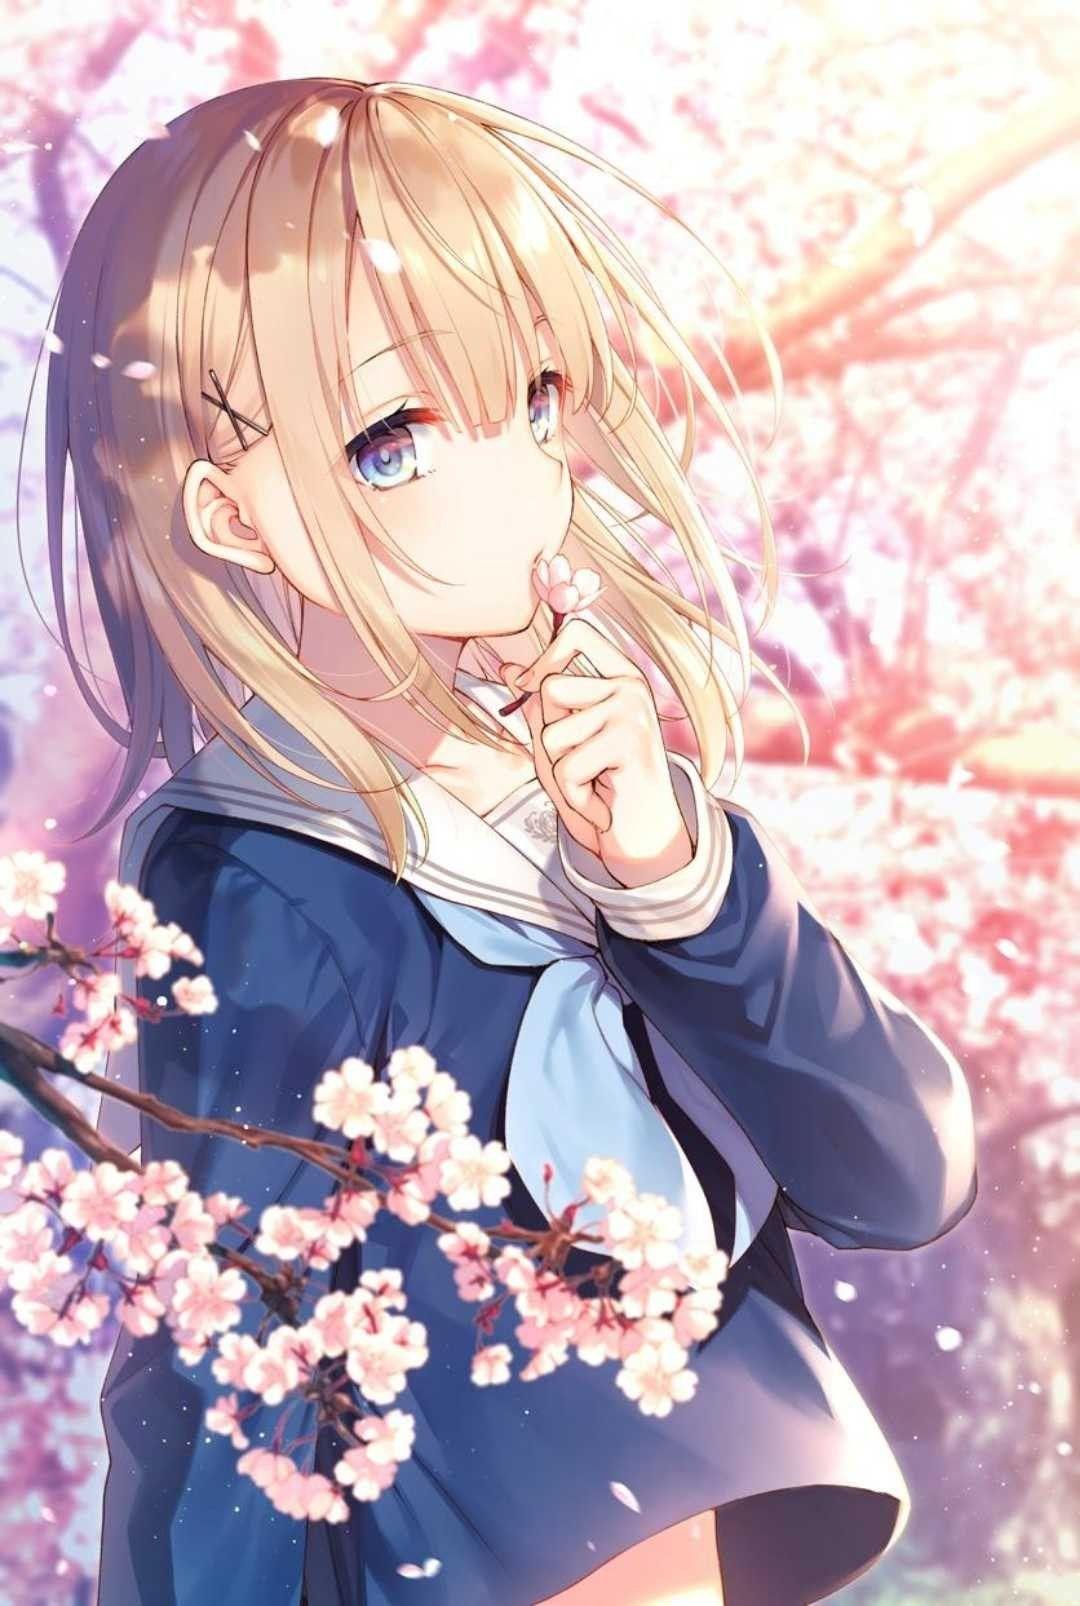 Beautiful Anime Girl Student Wallpapers - Wallpaper Cave
